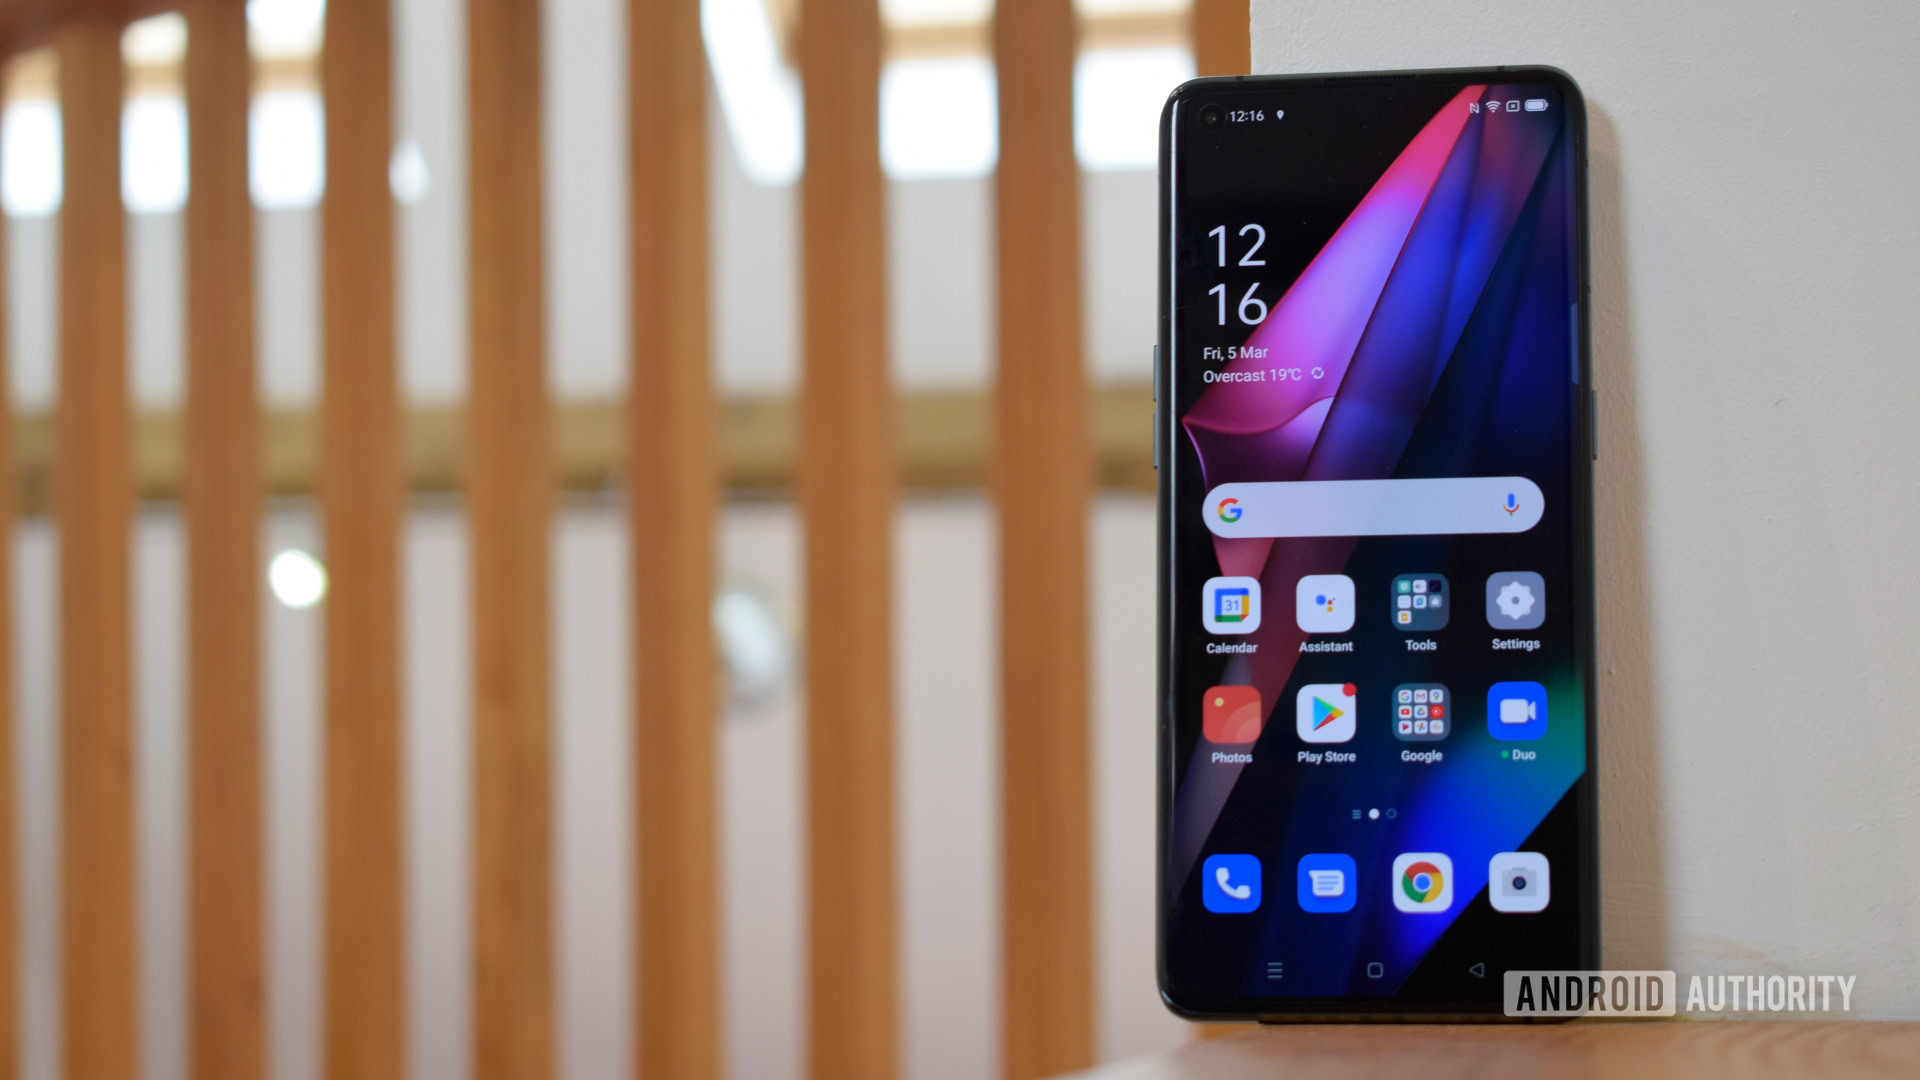 Oppo Find X3 Neo smartphone in review: Focus on the camera -   Reviews